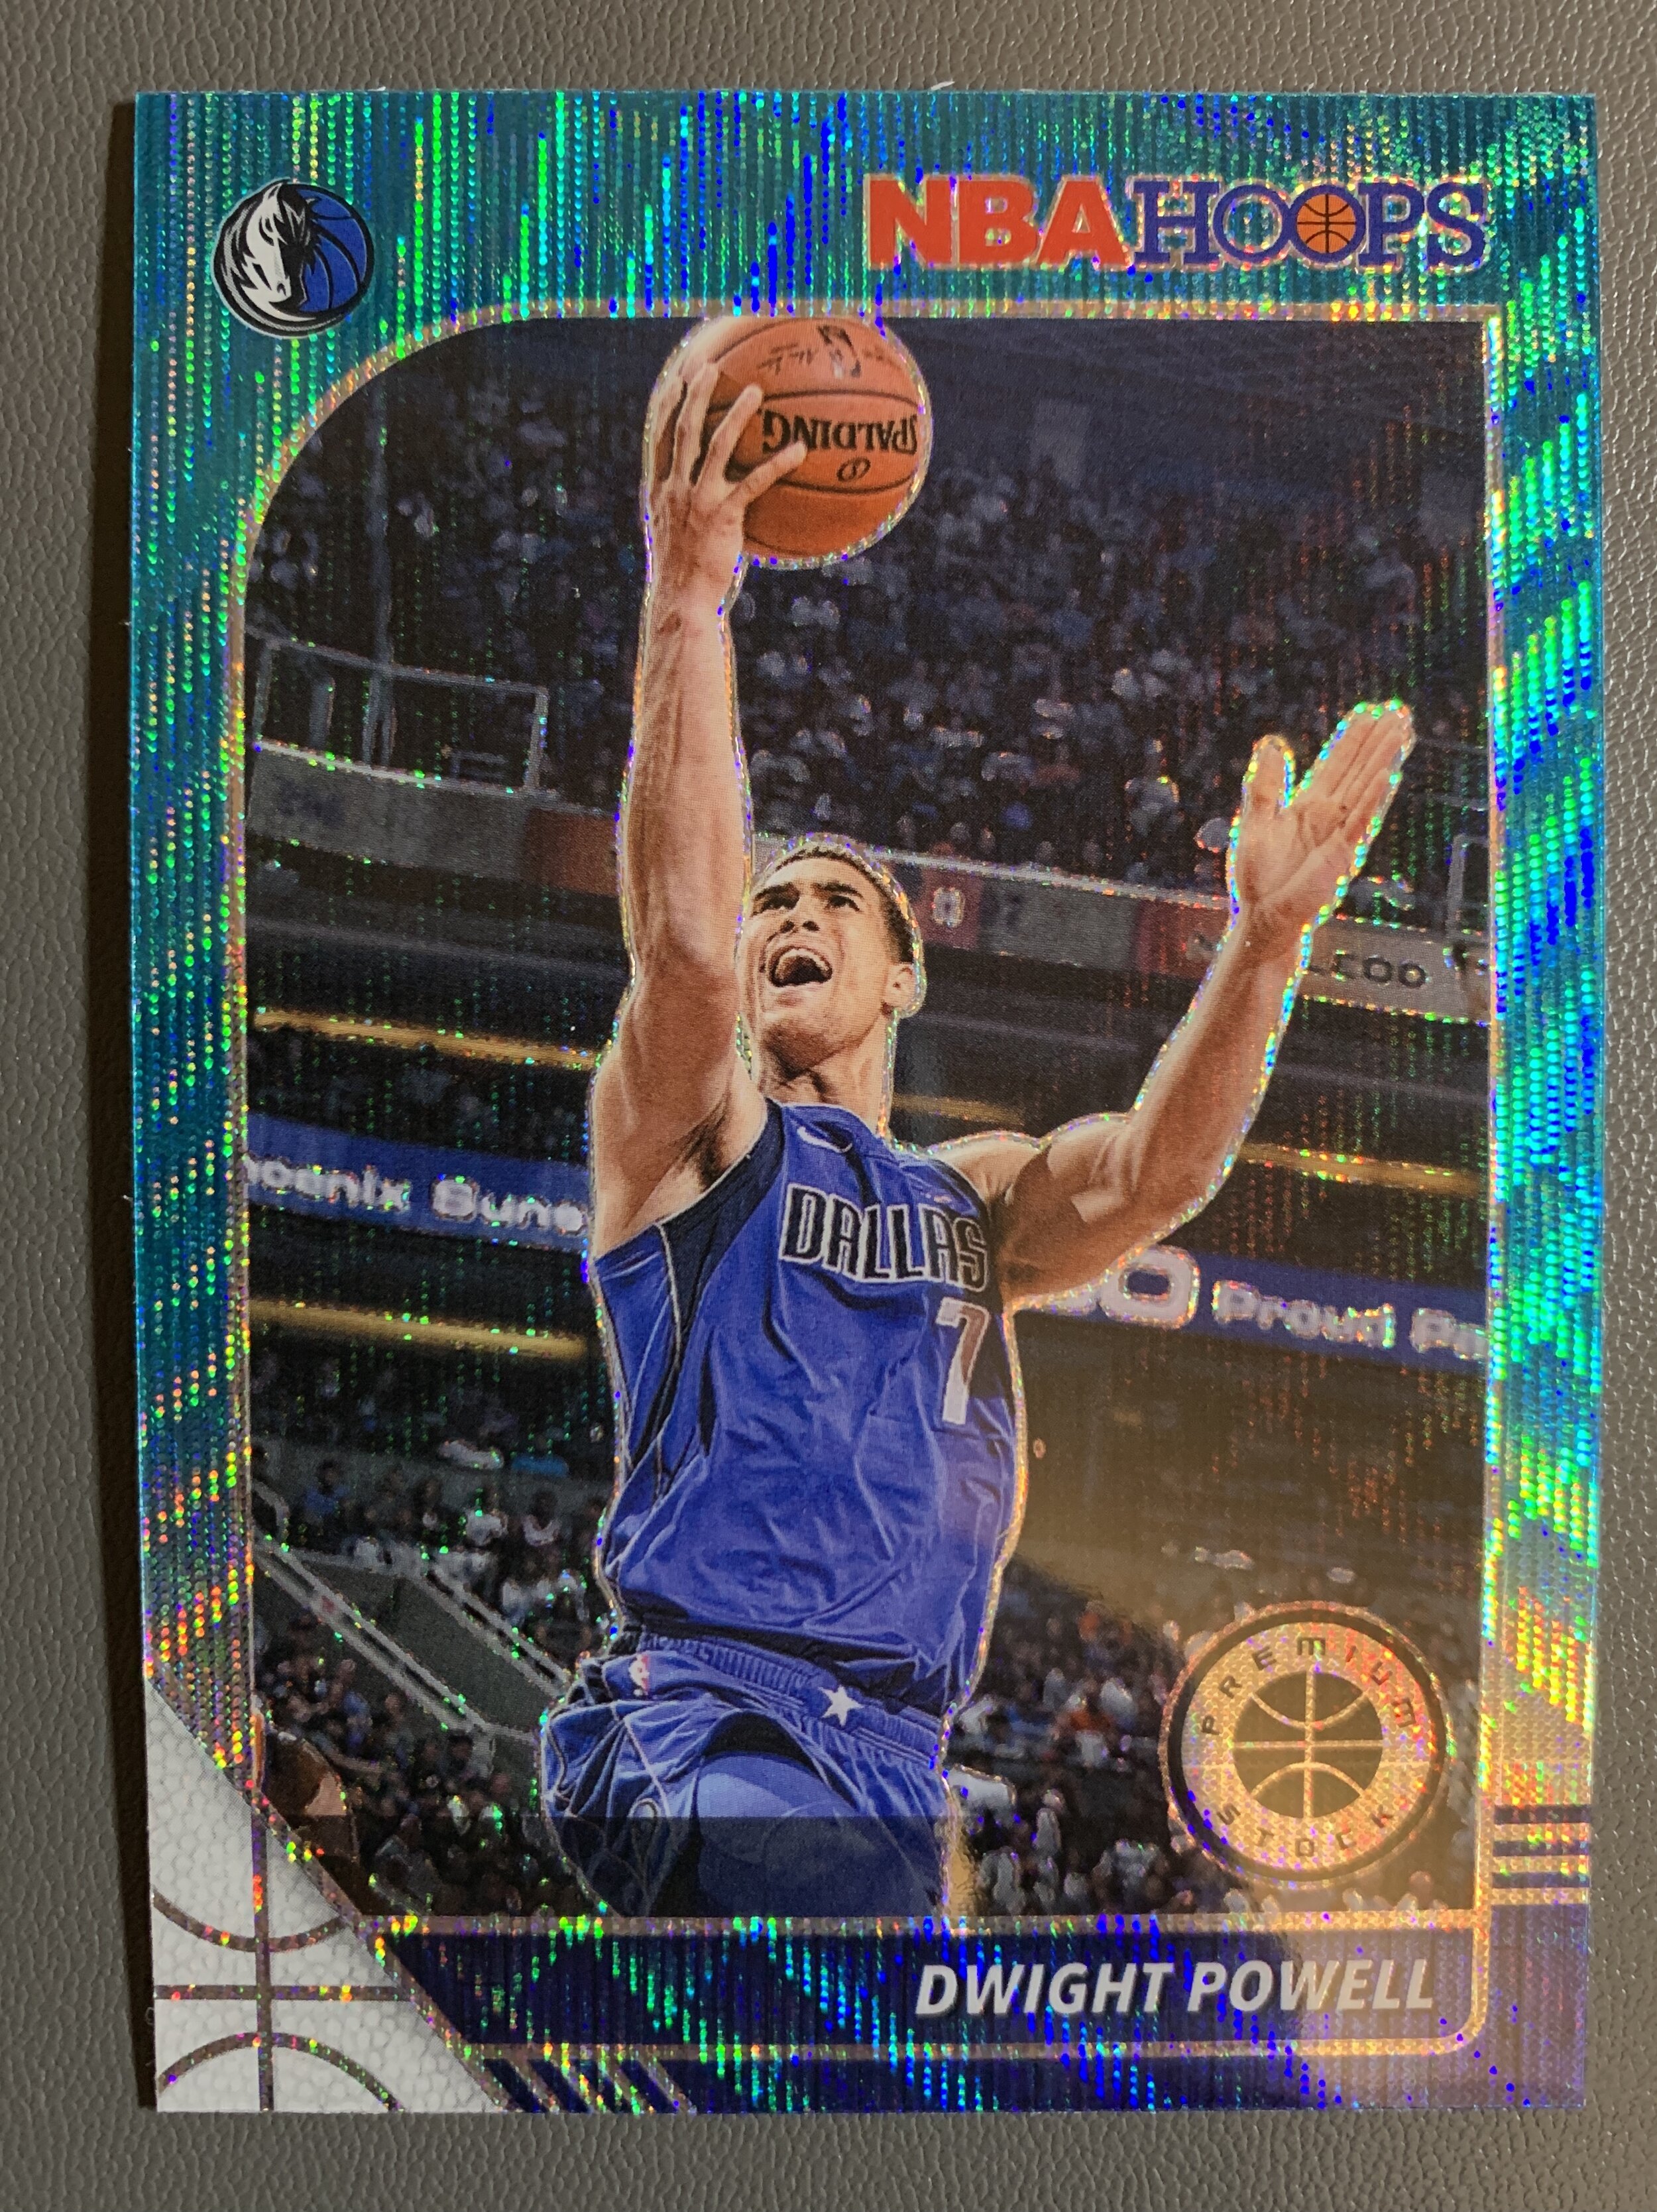 Luka lob partner, Dwight Powell, rounds out the examples of tough to pull Wave cards. This one is the Teal Wave version.